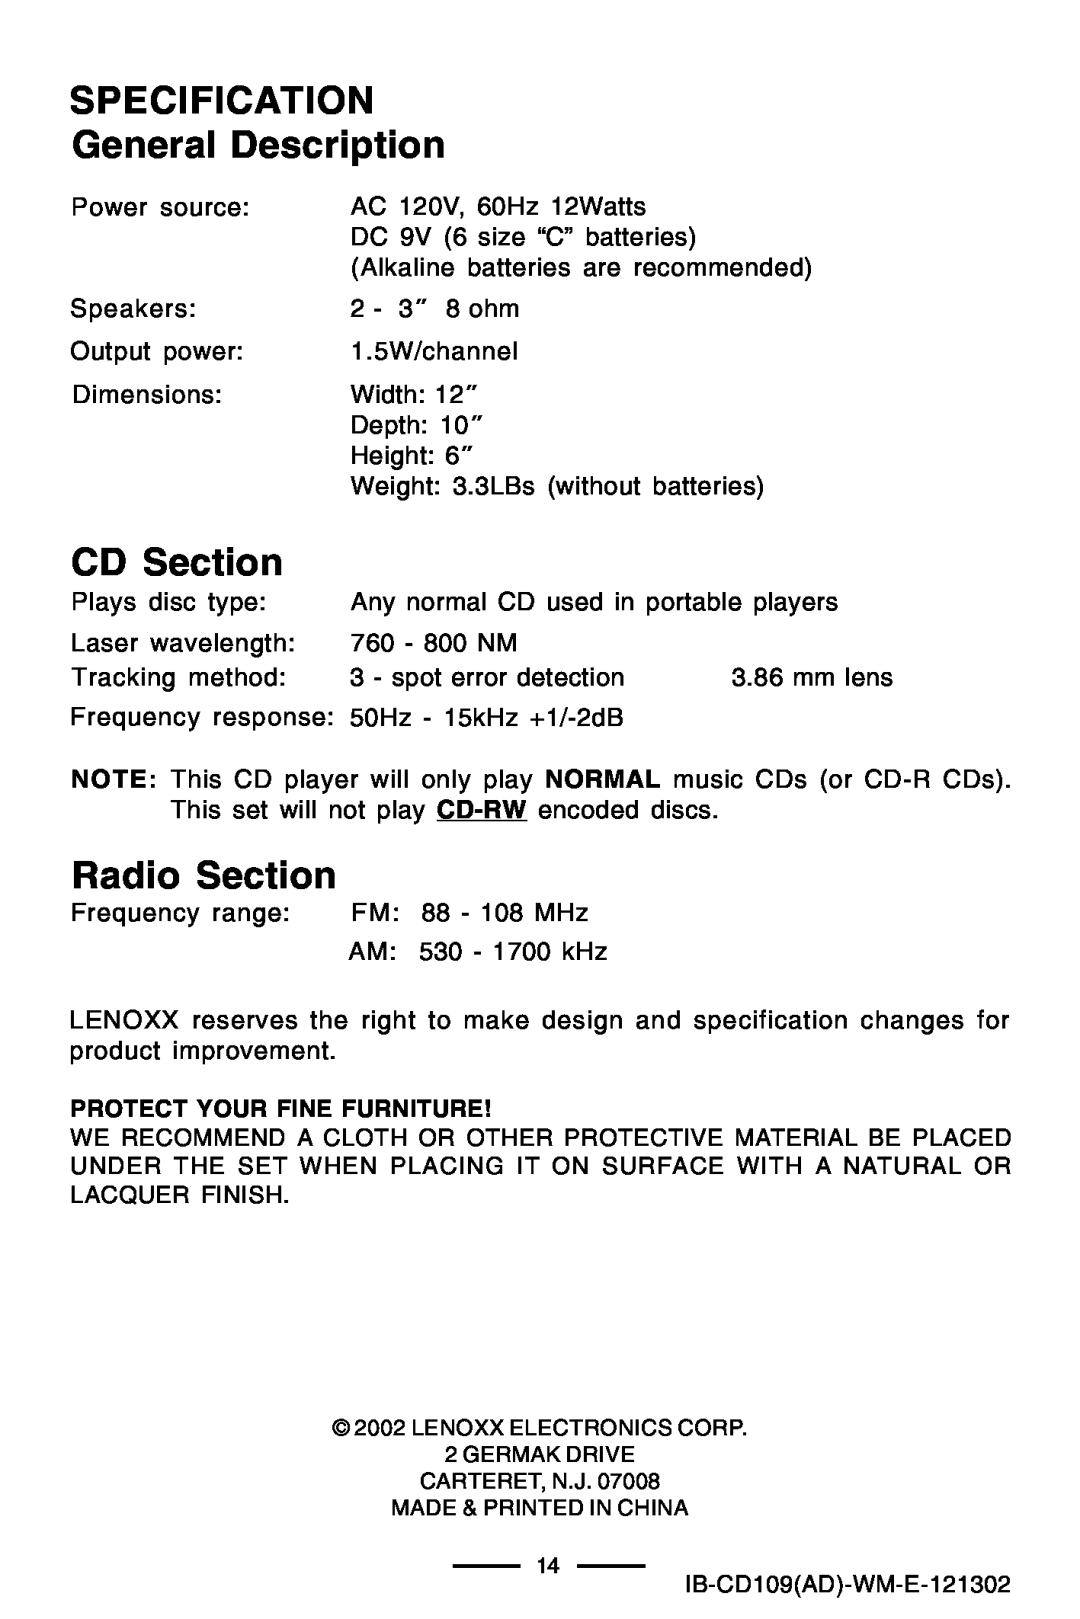 Lenoxx Electronics CD109 manual SPECIFICATION General Description, CD Section, Radio Section 